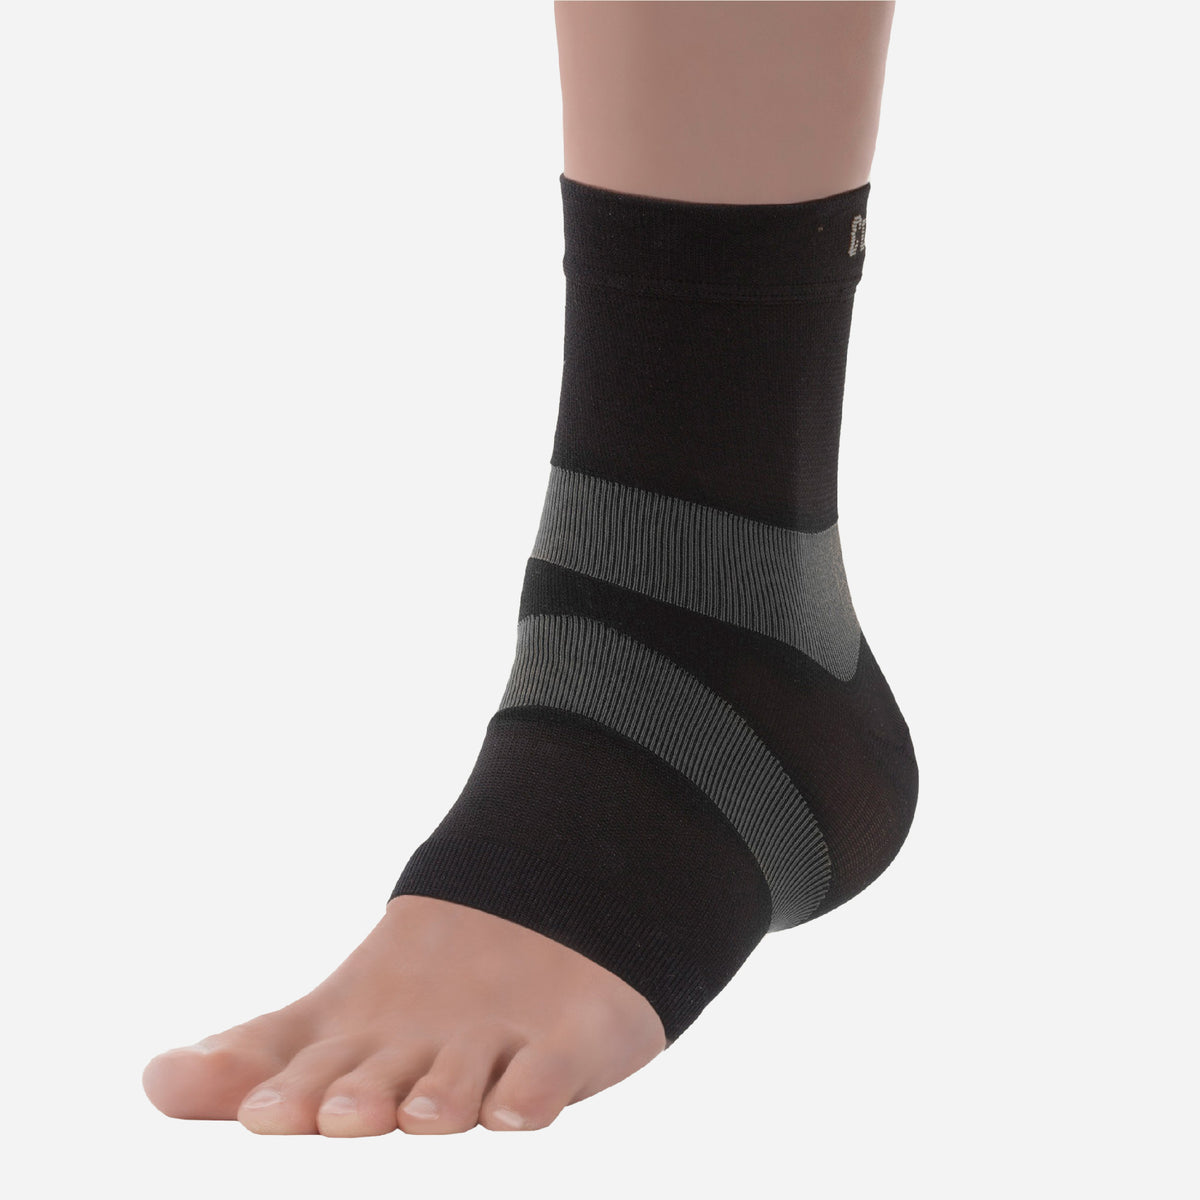 ANKLE COMPRESSION BAND